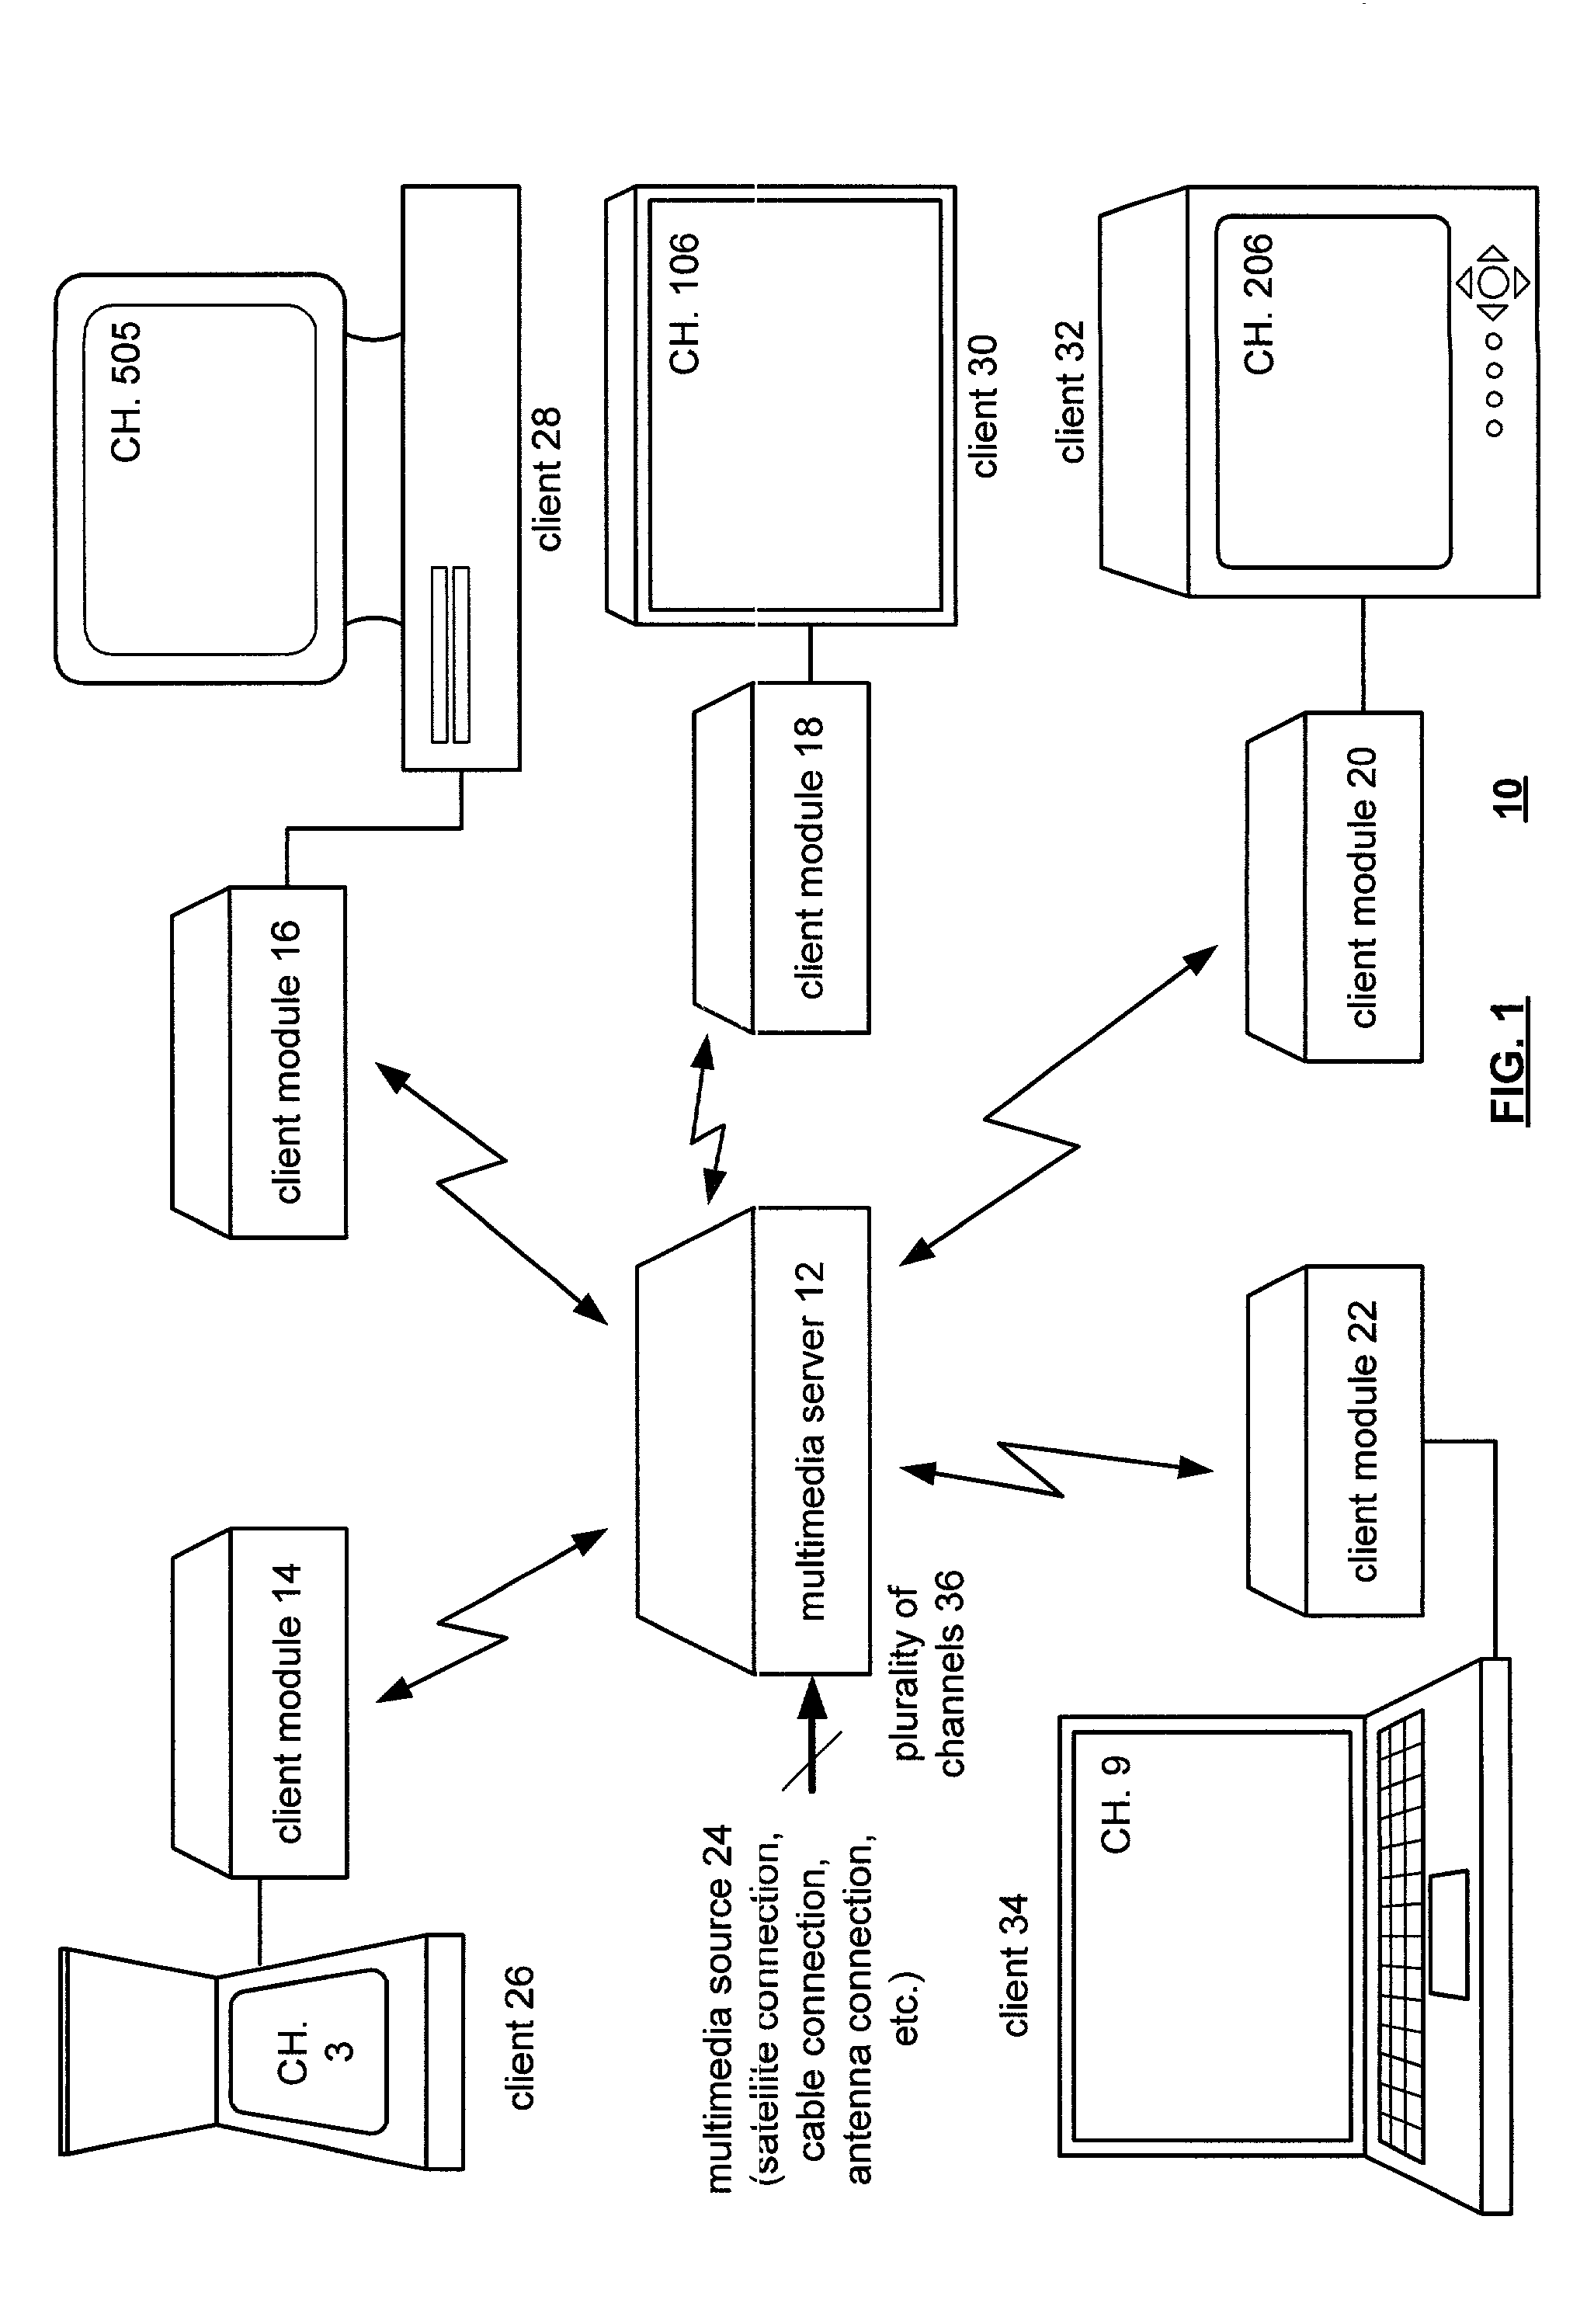 Method and apparatus for hub-based network access via a multimedia system